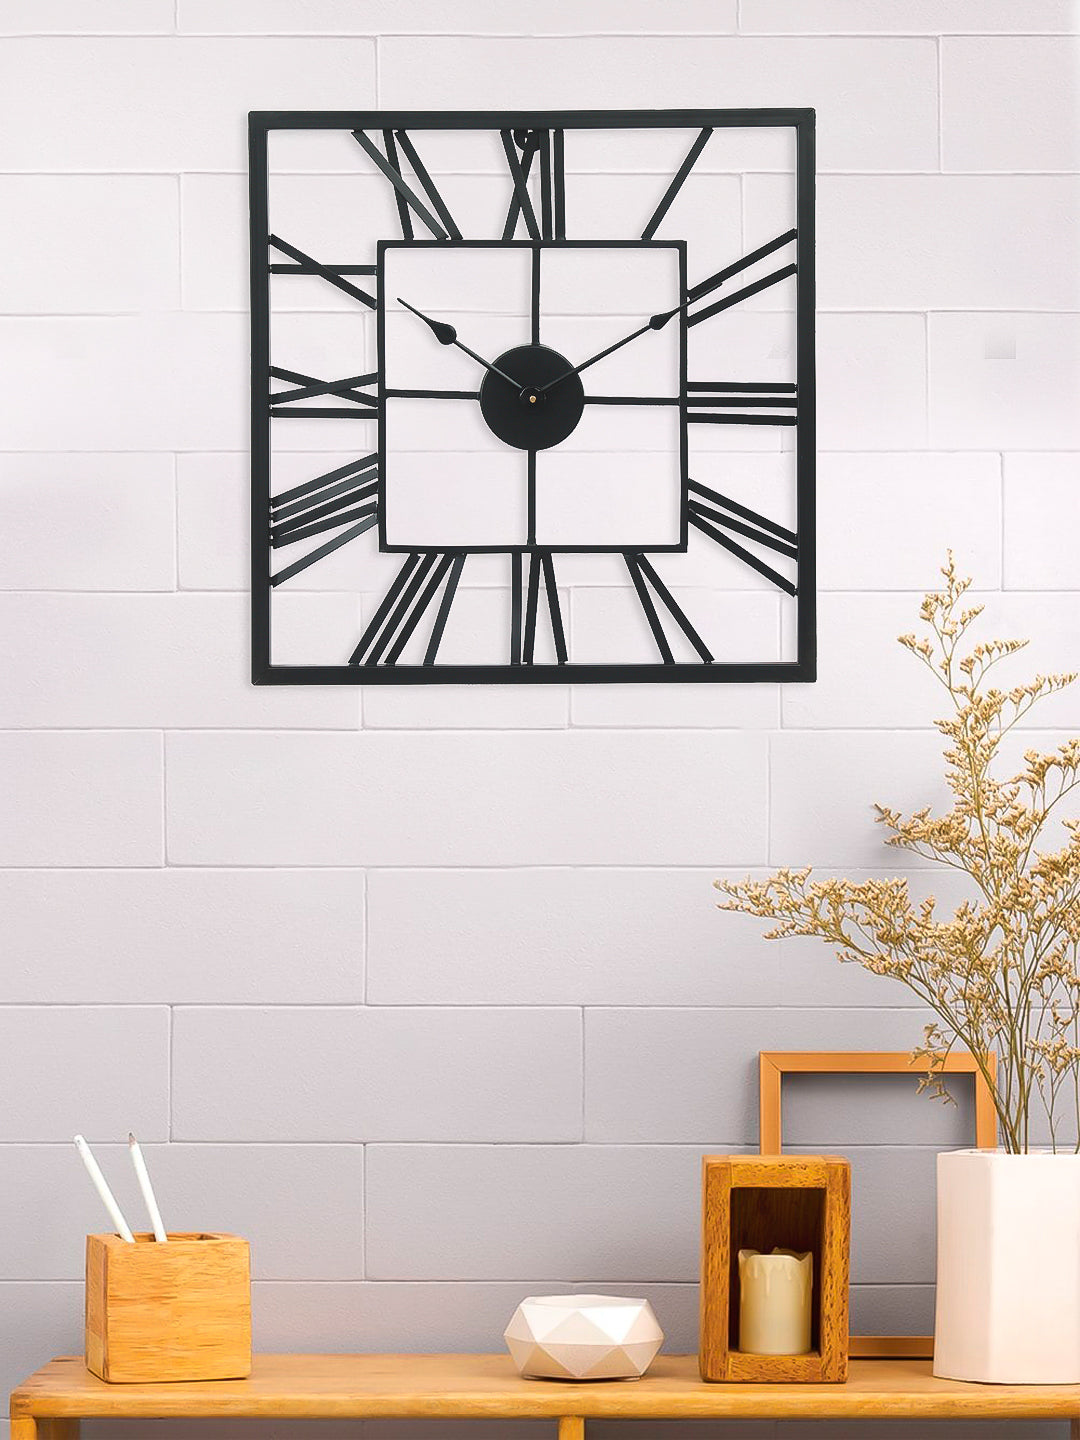 Black Iron Square Handcrafted Analog Roman Numeral Wall Clock Without Glass 1